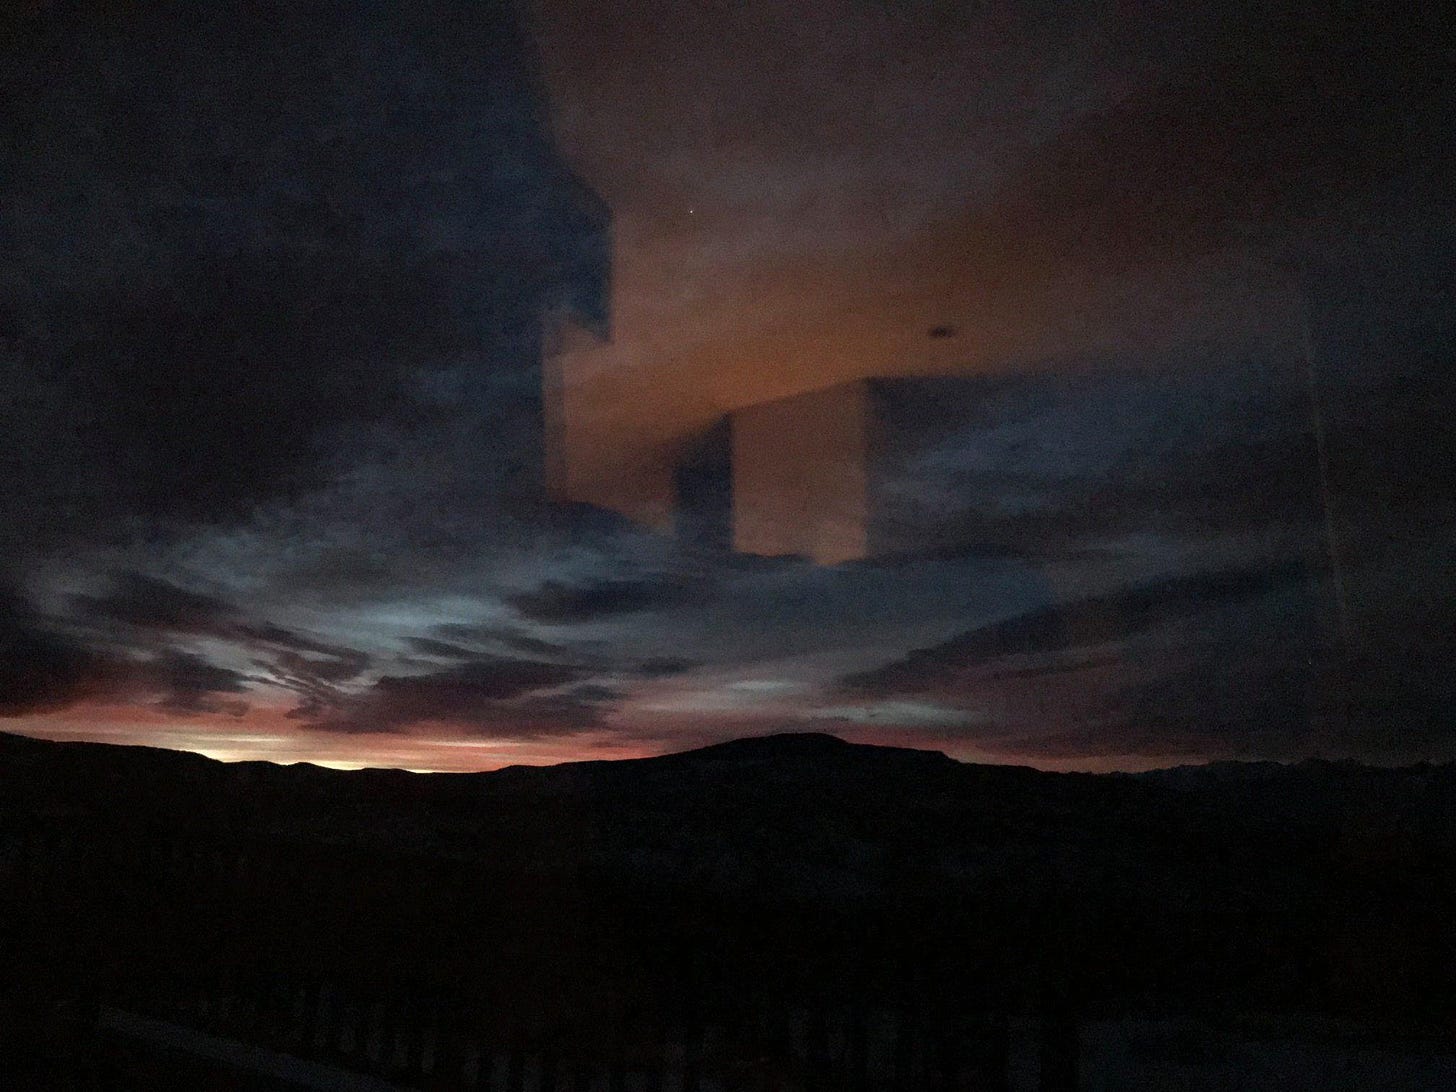 image of early sunrise over distant mountains with some variation in color and a few dark clouds